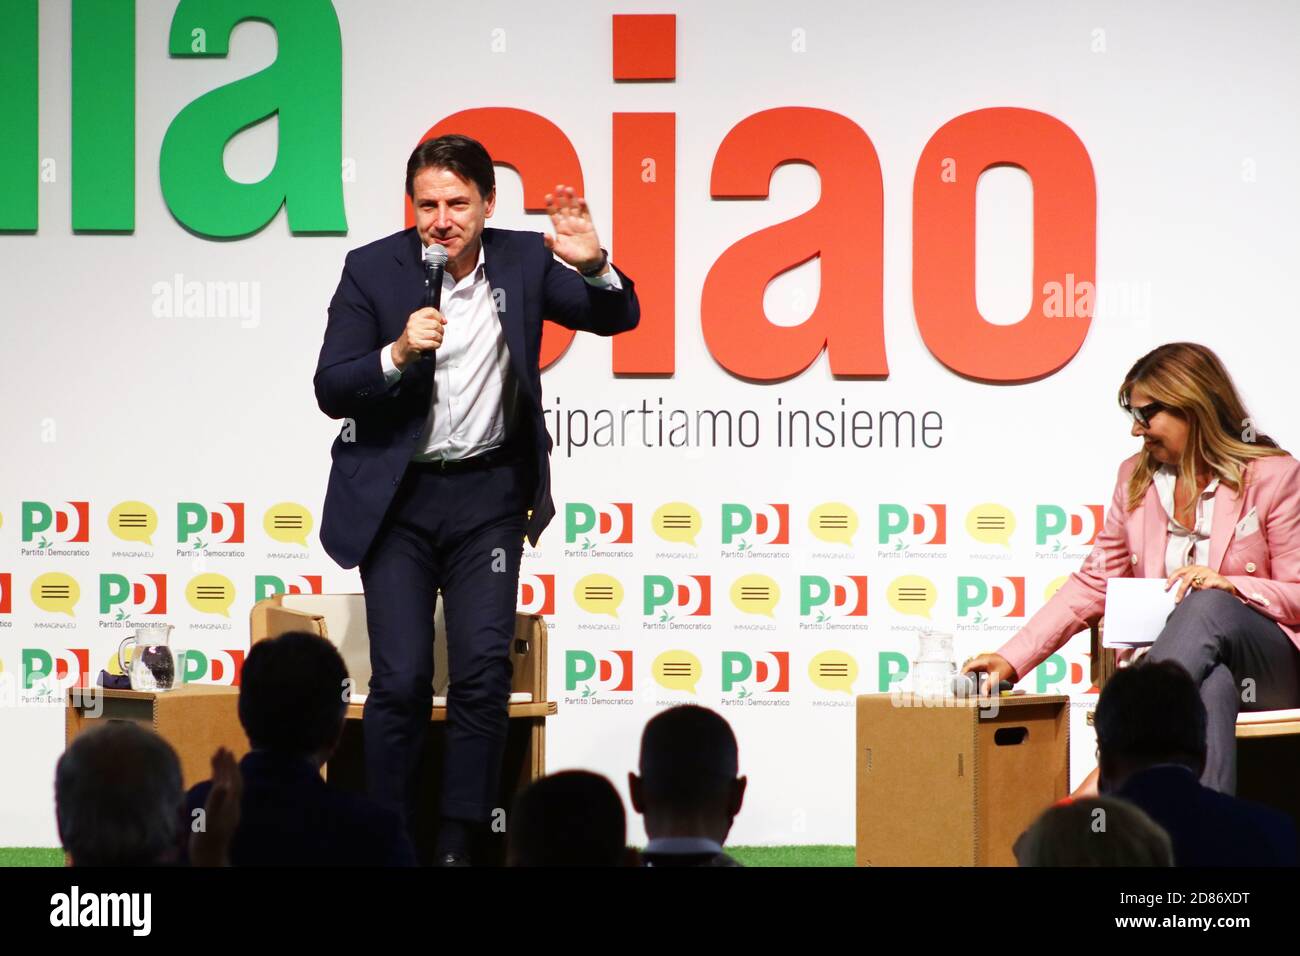 Modena, Italy, September 8, 2020 - Giuseppe Conte, prime minister of the Italian Republic, public interview at a Democratic Party event Stock Photo